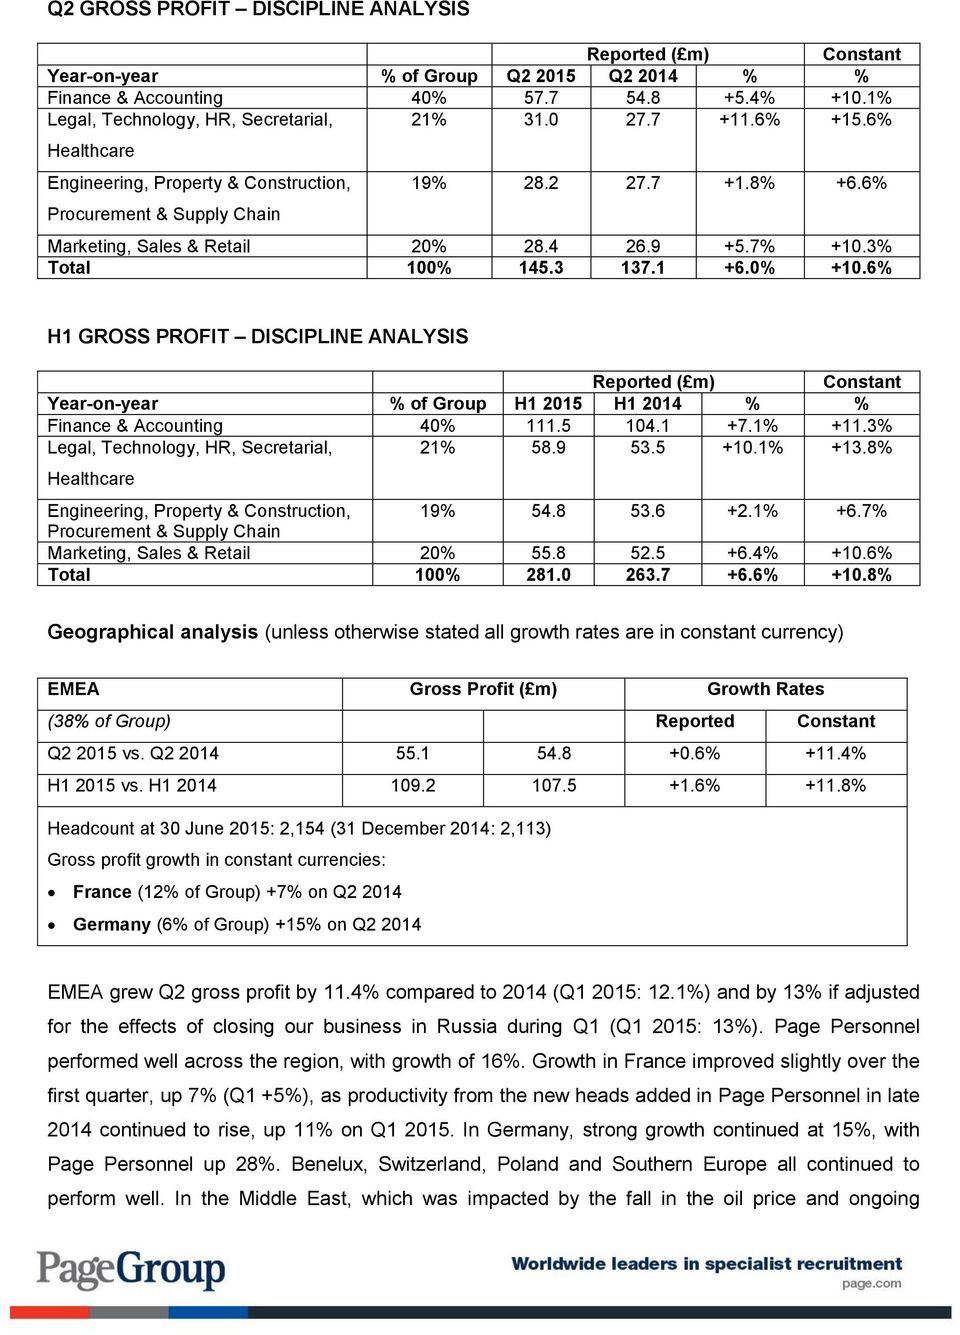 0% +10.6% H1 GROSS PROFIT DISCIPLINE ANALYSIS Reported ( m) Constant Year-on-year % of Group H1 2015 H1 2014 % % Finance & Accounting 40% 111.5 104.1 +7.1% +11.